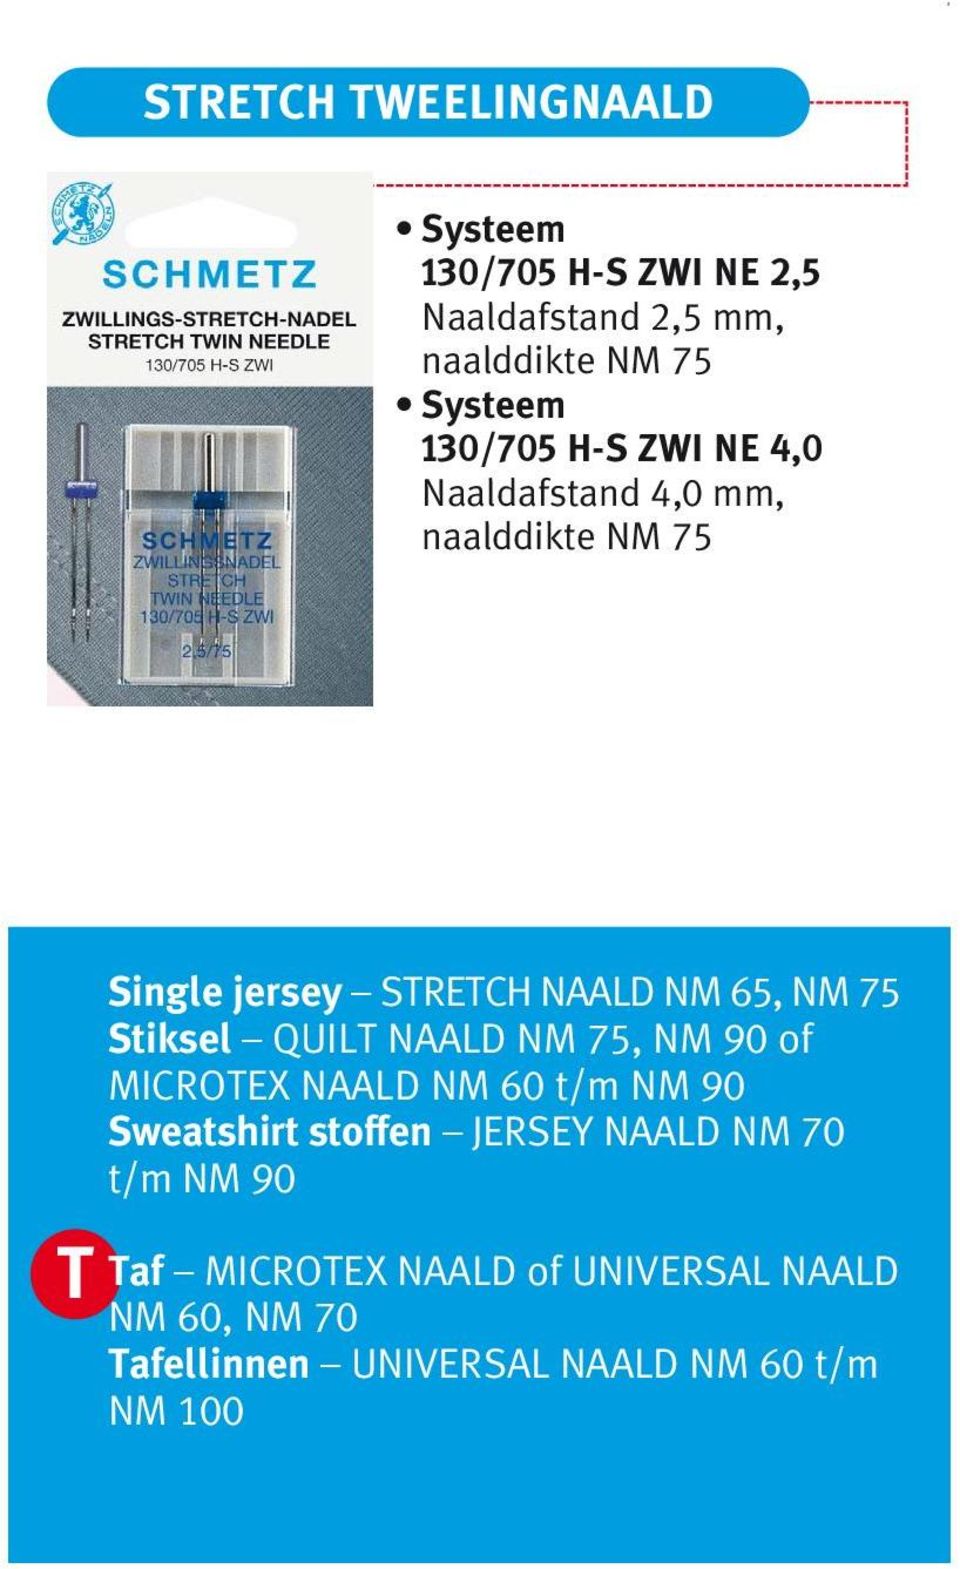 Stiksel QUILT NAALD NM 75, NM 90 of MICROTEX NAALD NM 60 t/m NM 90 Sweatshirt stoffen JERSEY NAALD NM